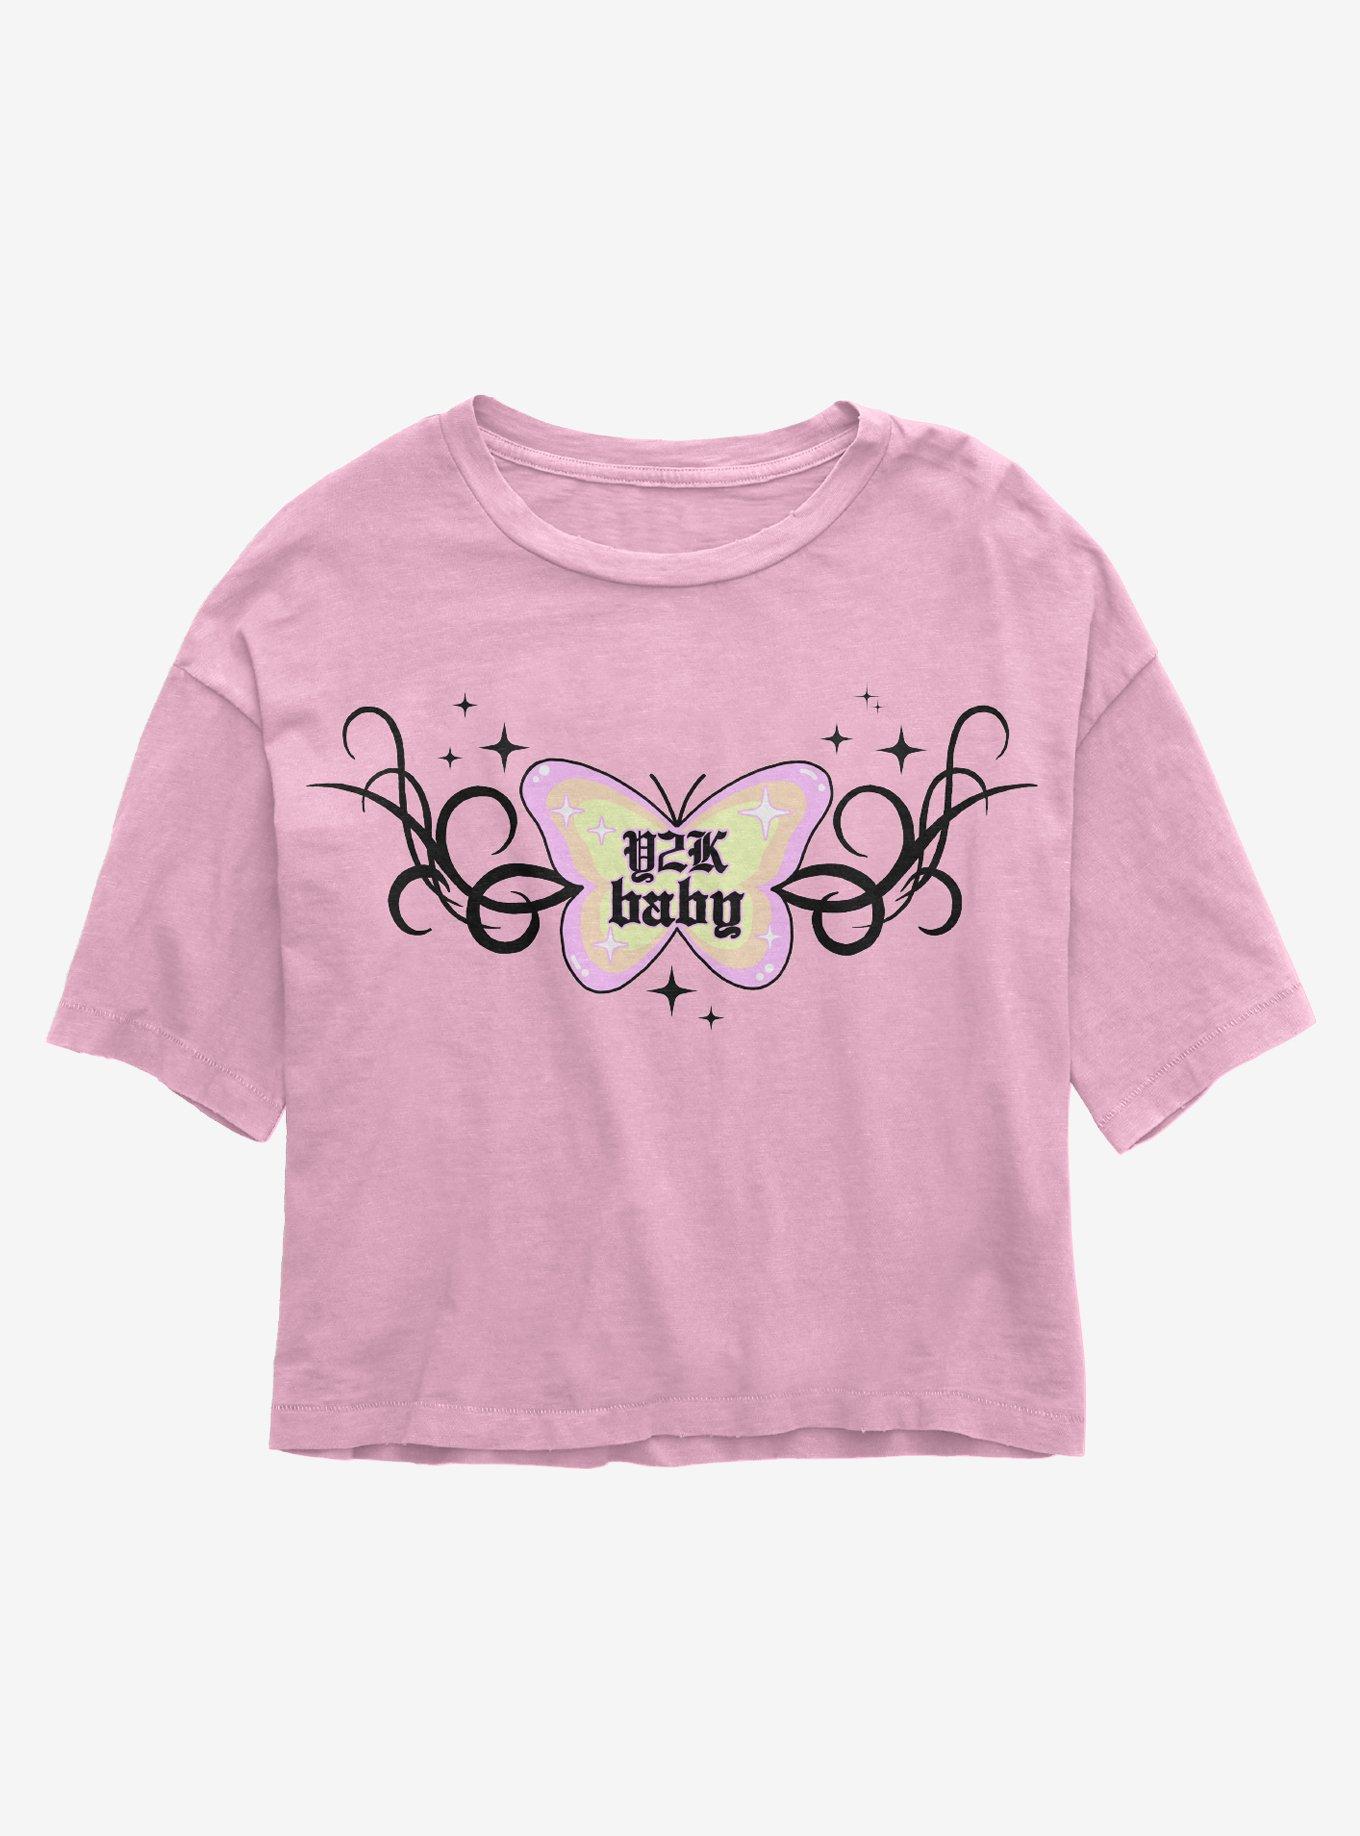 Y2K Baby Butterfly Girls Crop T-Shirt | Hot Topic